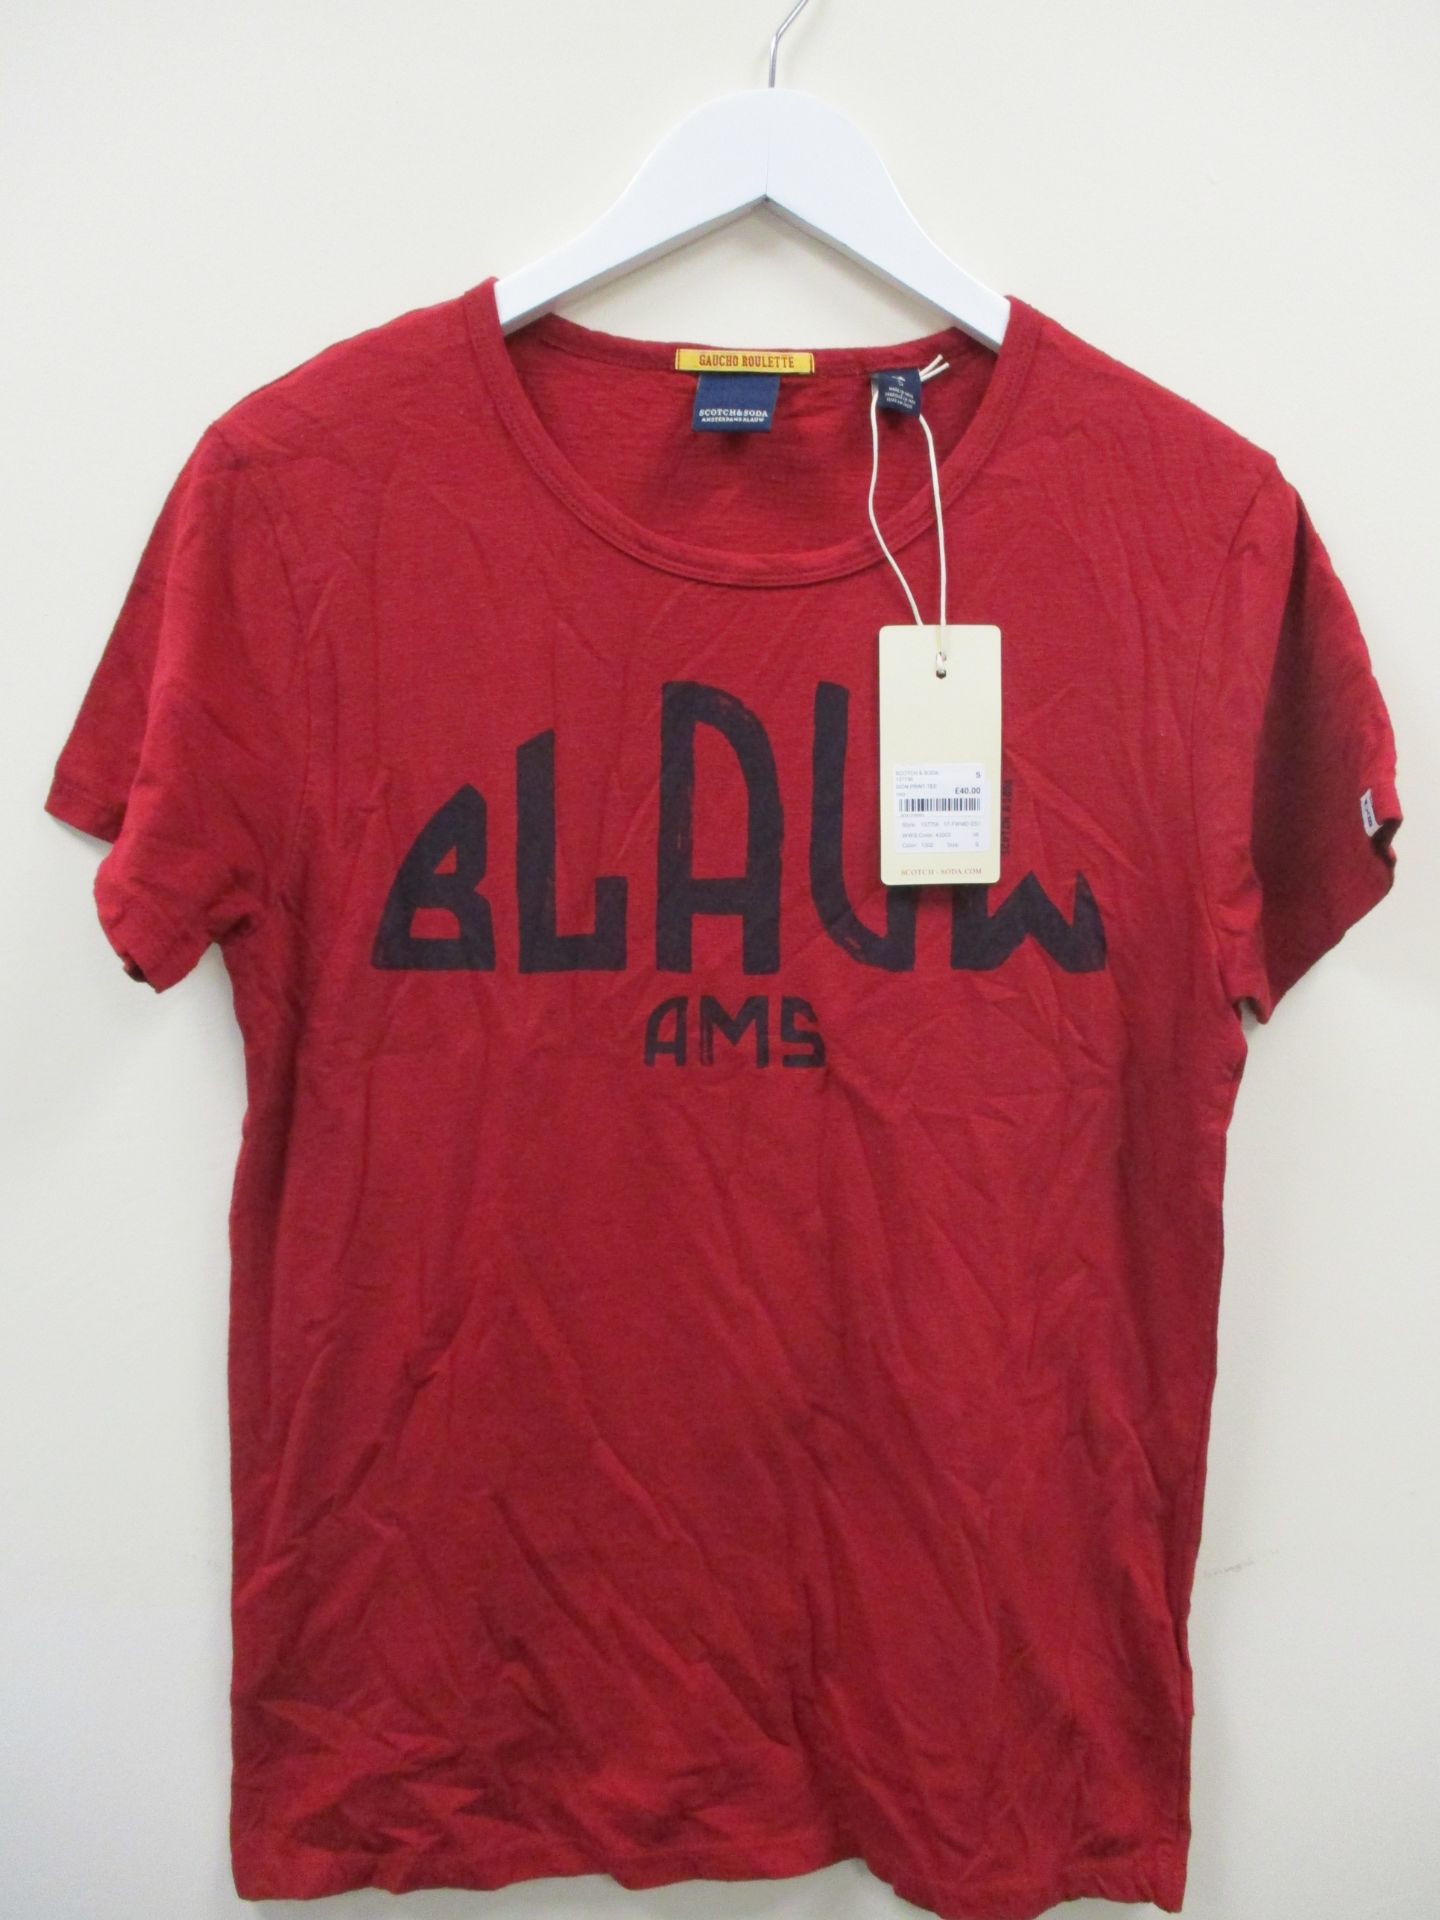 Scotch and Soda t-shirt - red - small RRP £40